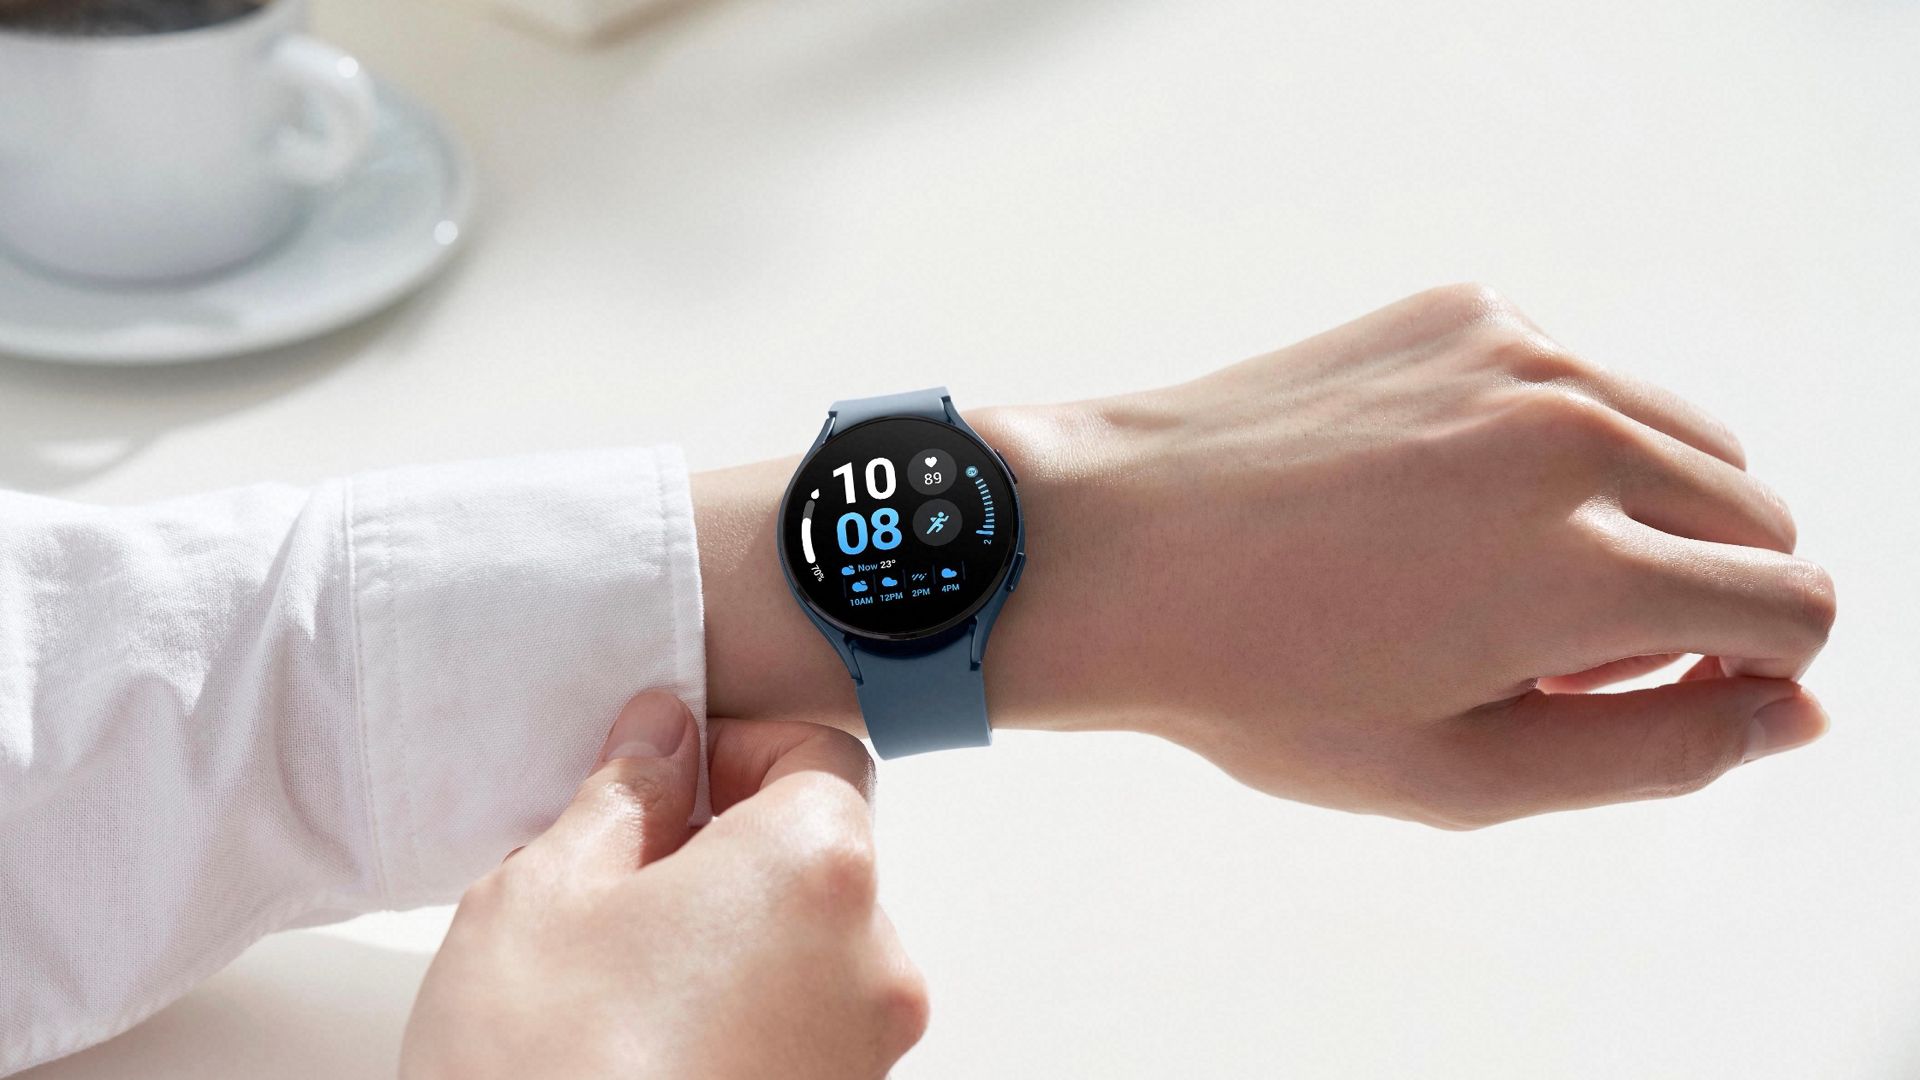 Galaxy Watch 5 health and fitness